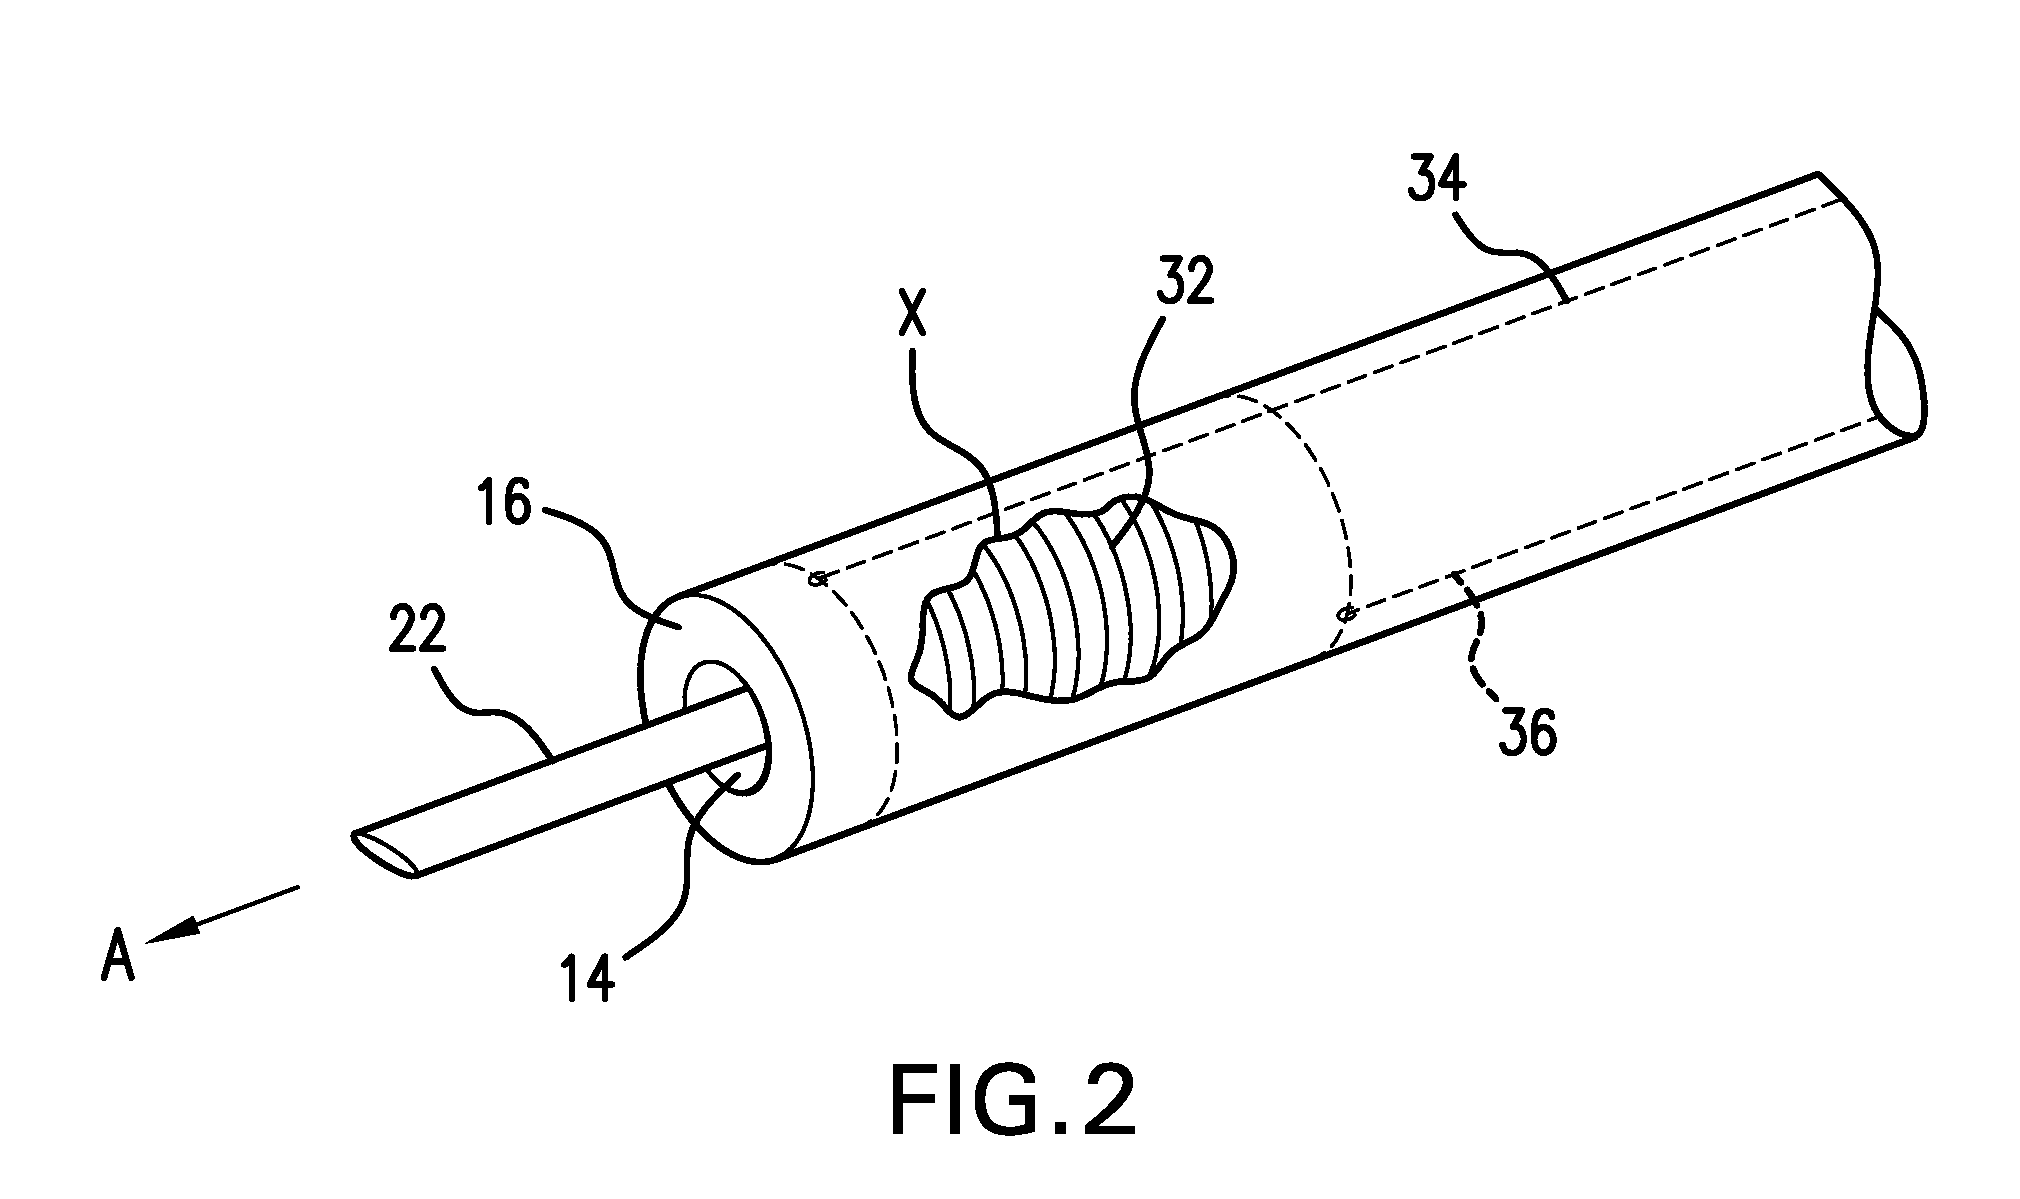 Therapeutic catheter with displacement sensing transducer